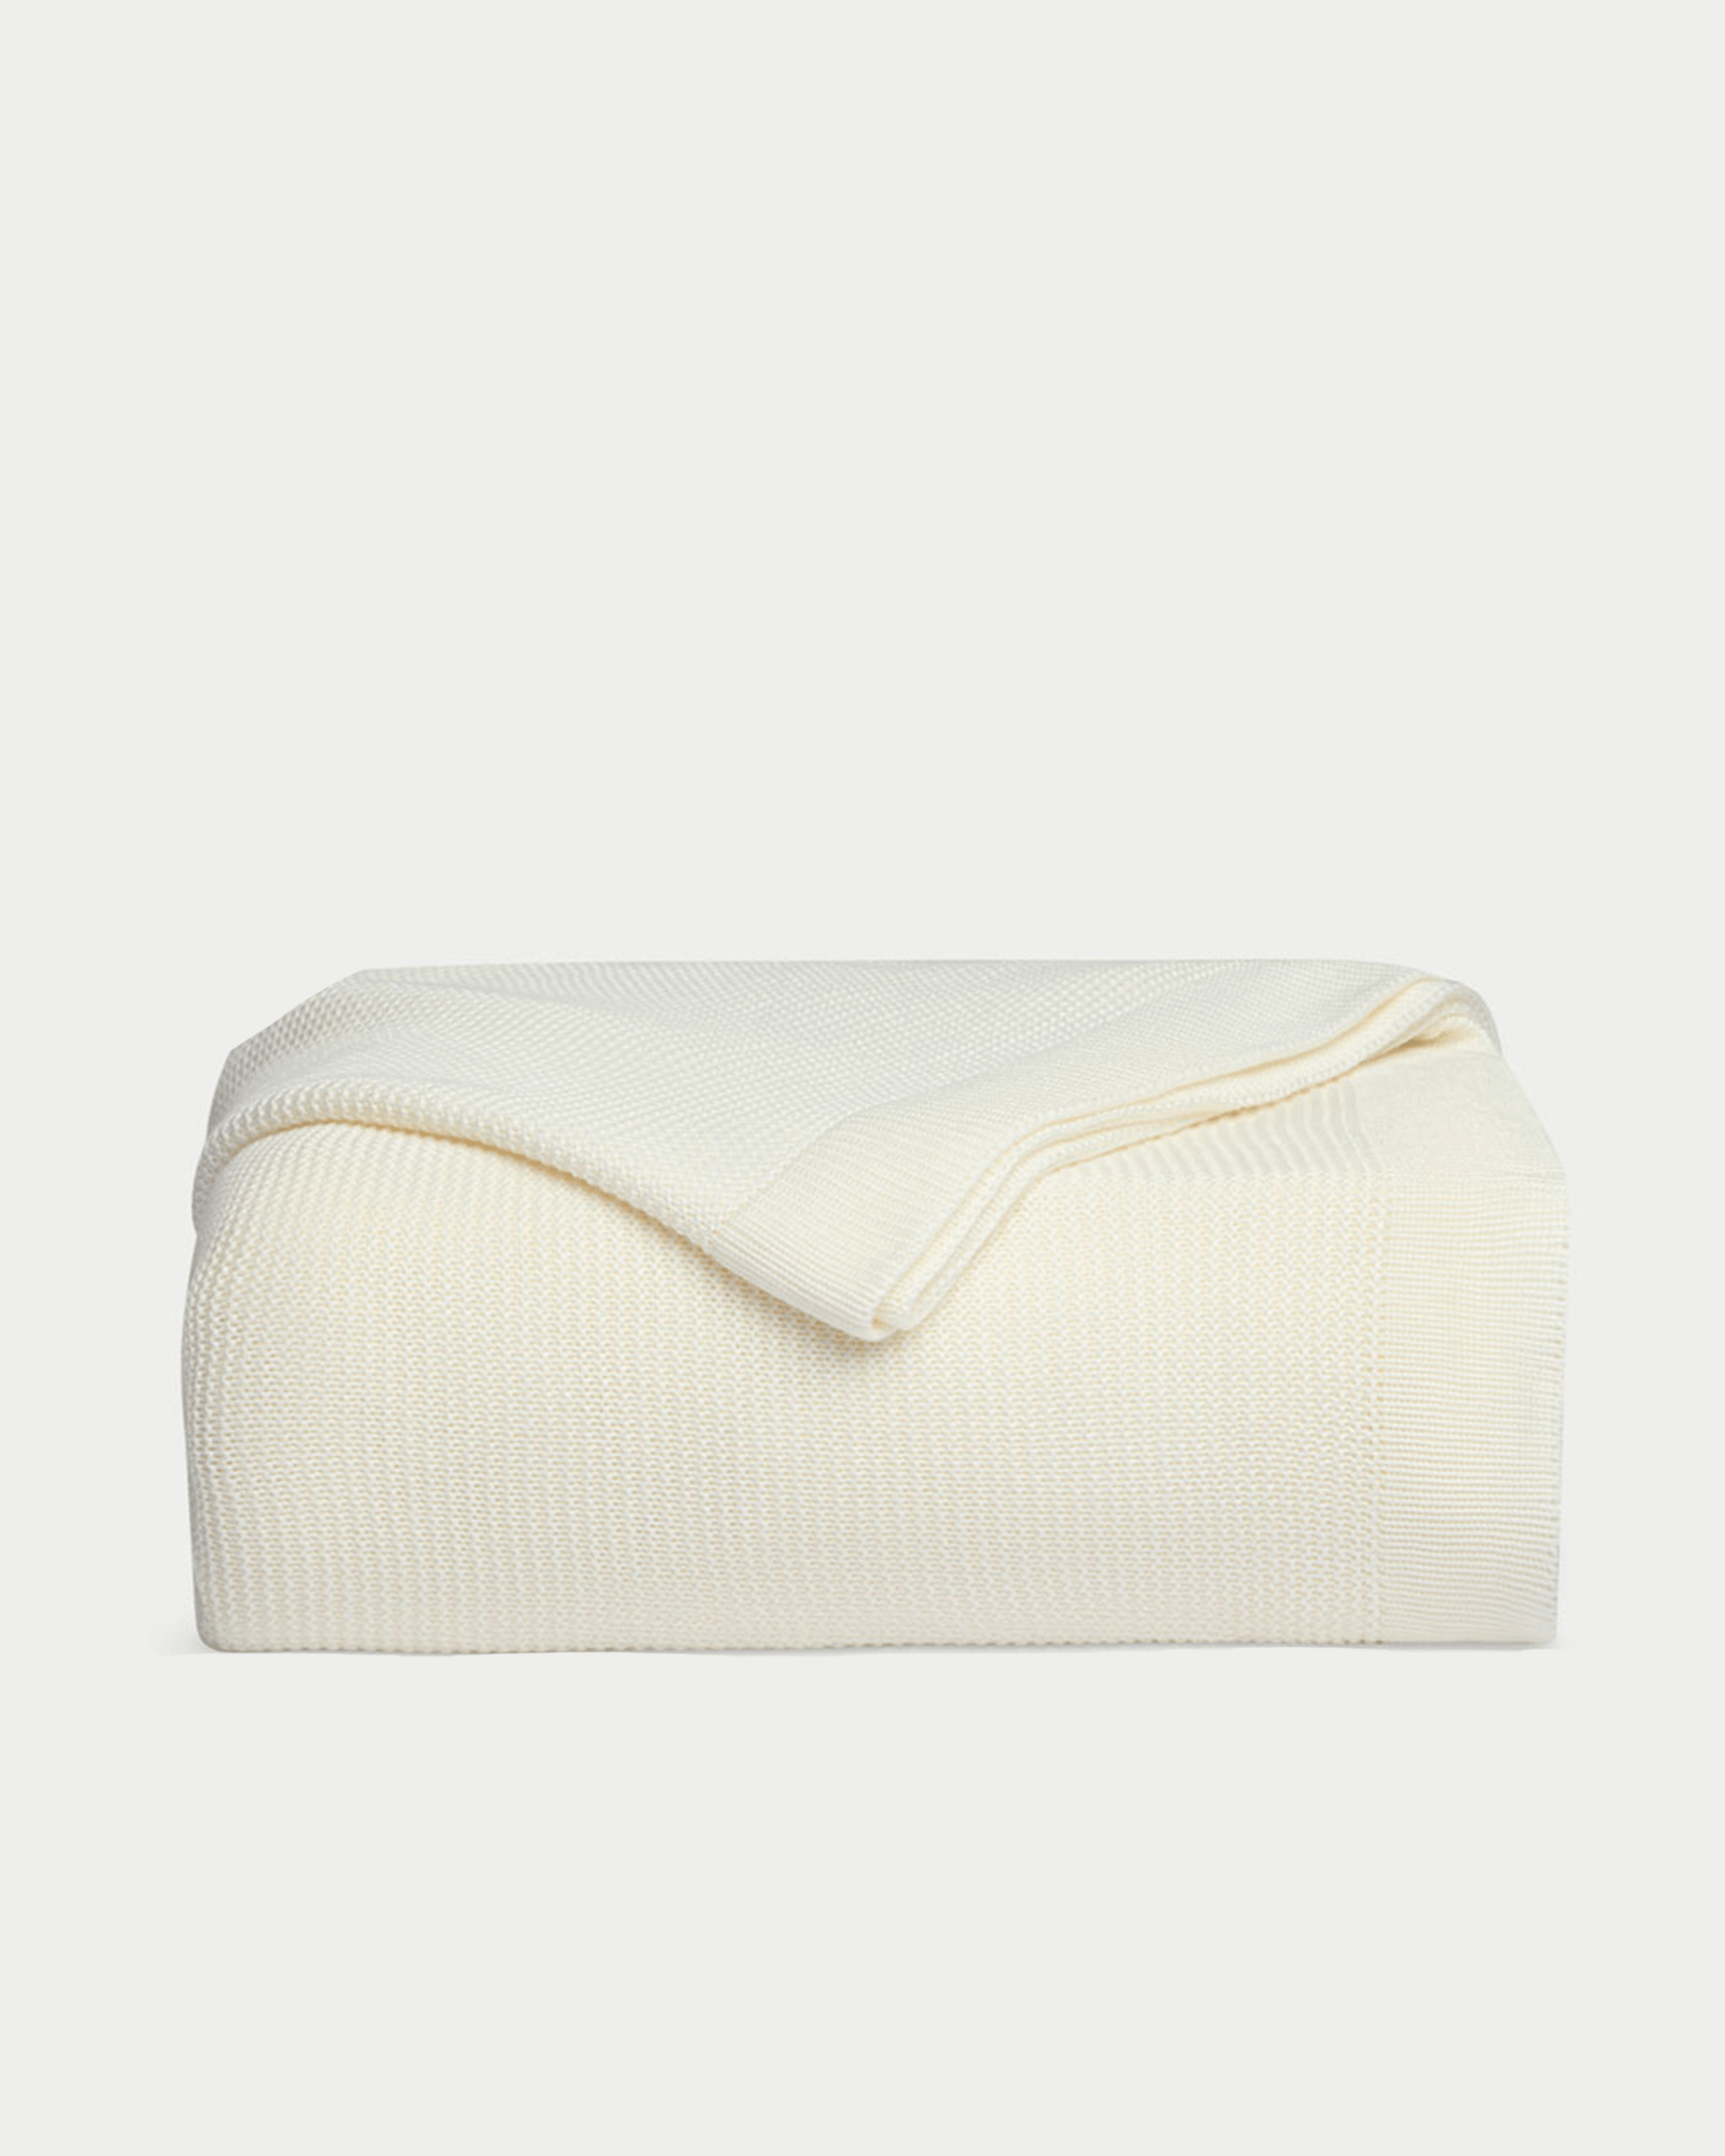 Ivory cloud knit blanket folded with white background |Color:Ivory